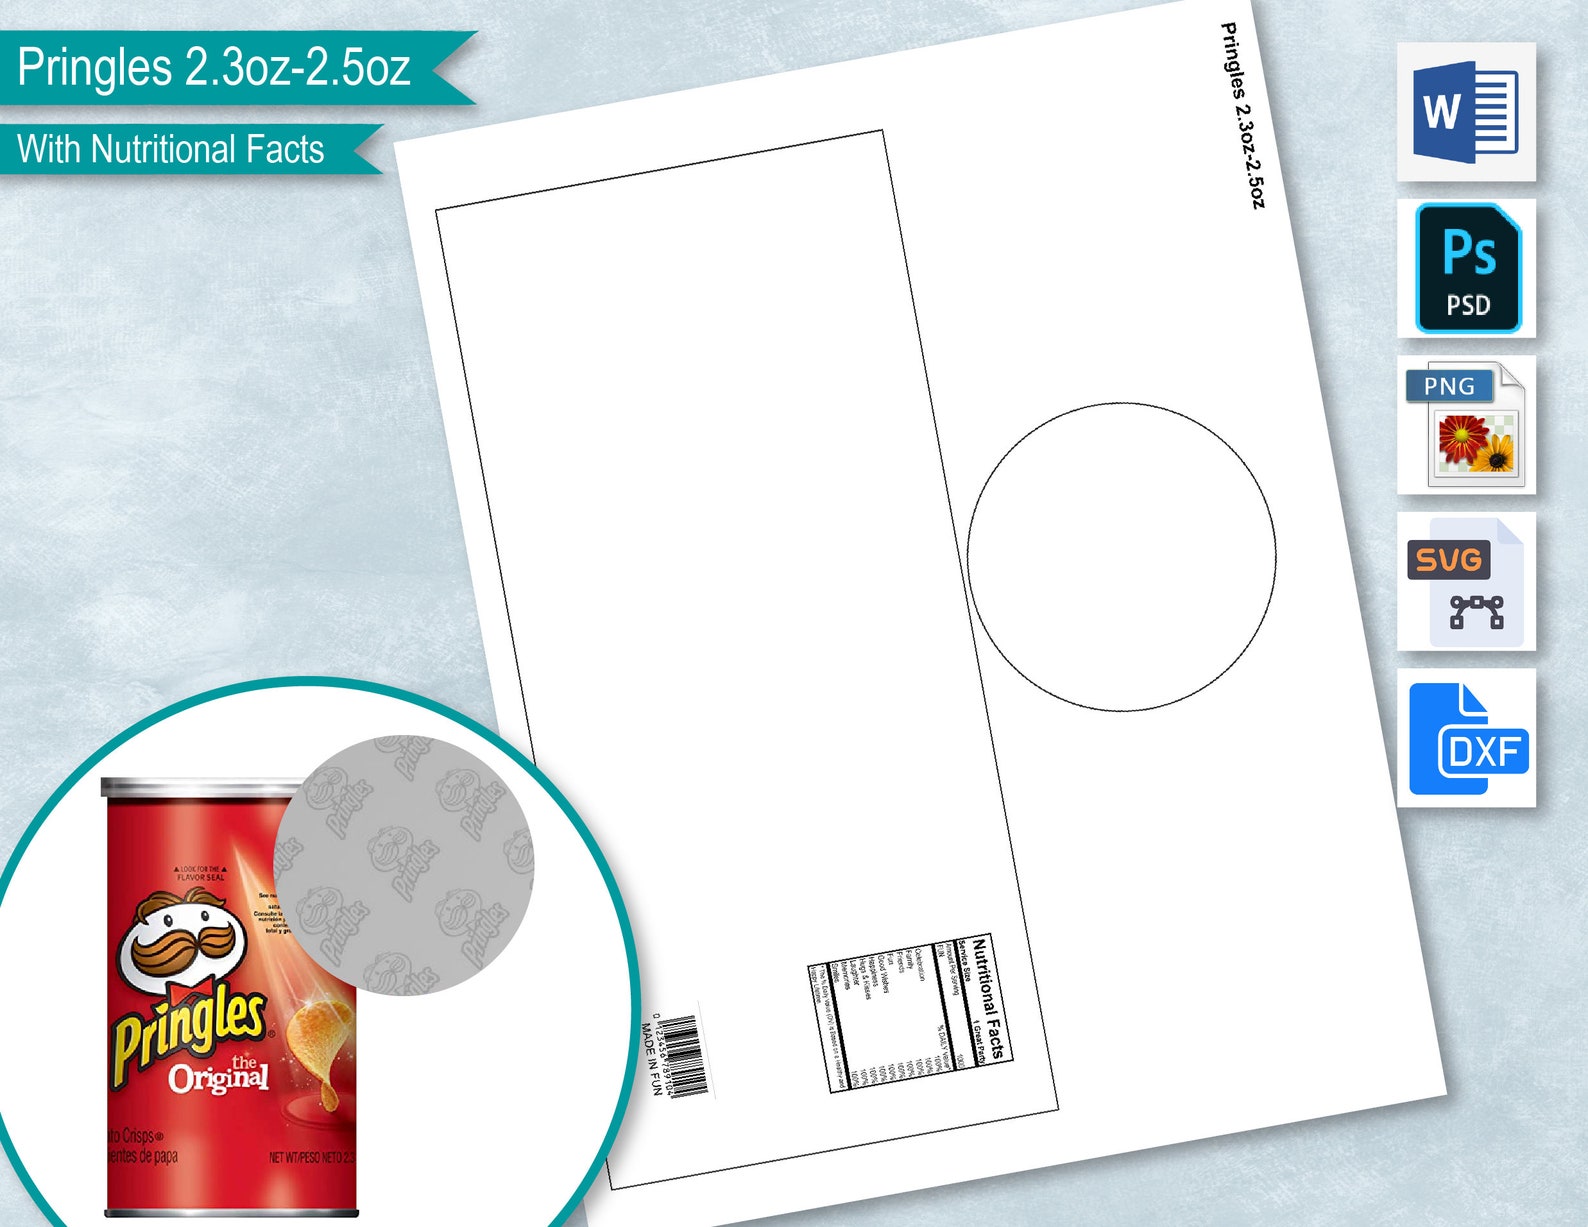 pringles-2-3oz-65g-topper-template-with-nutritional-facts-etsy